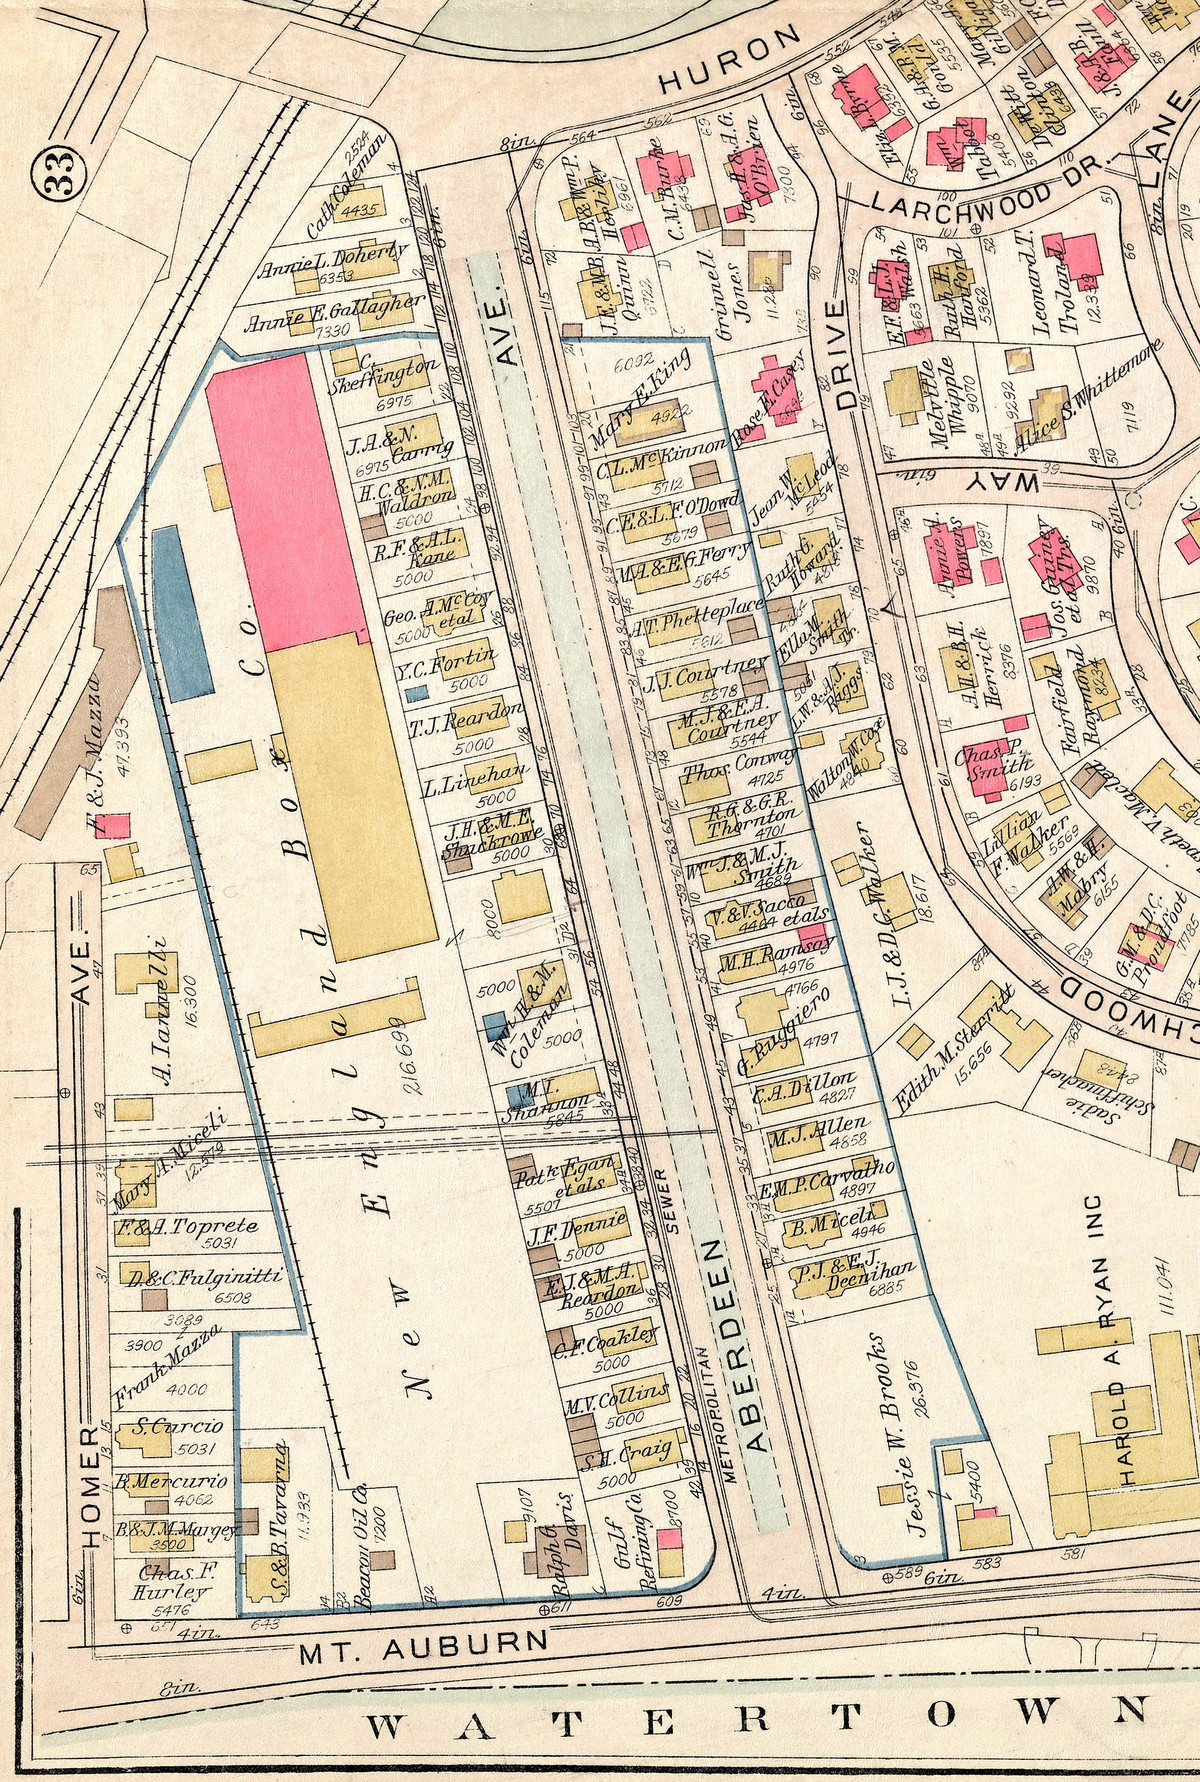 1930 Cambridge atlas showing the new Atwood &amp; McManus factory building (in pink).